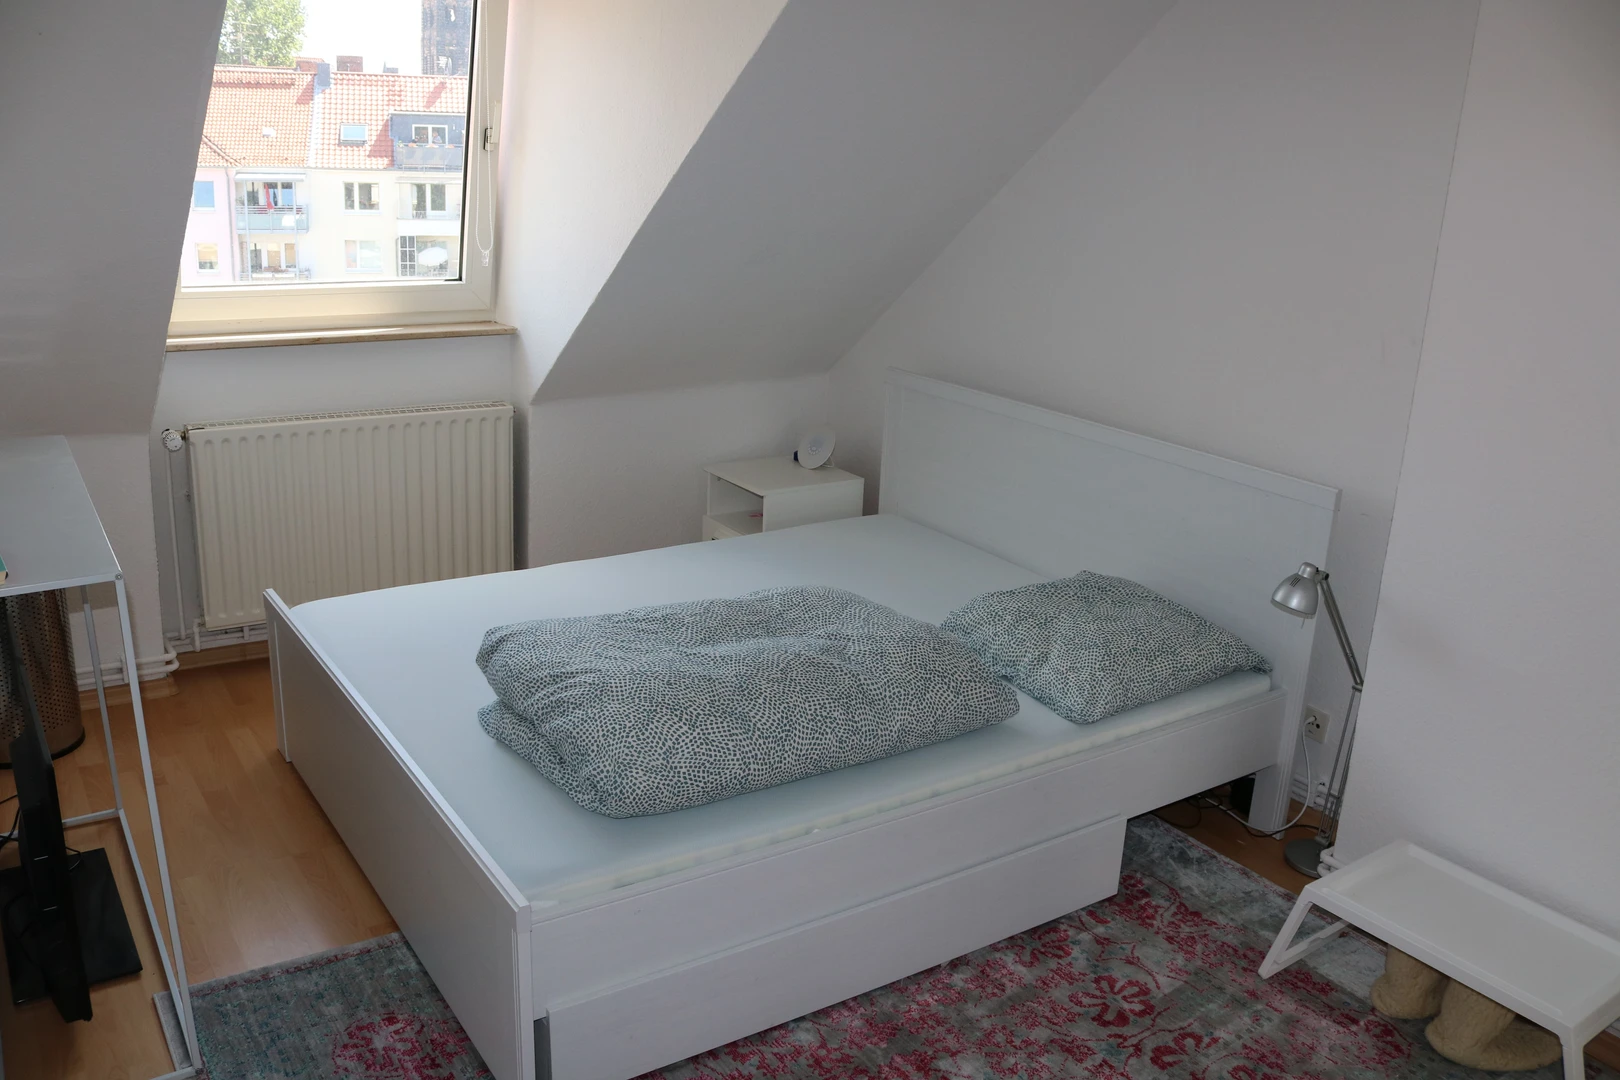 Room for rent in a shared flat in Hanover